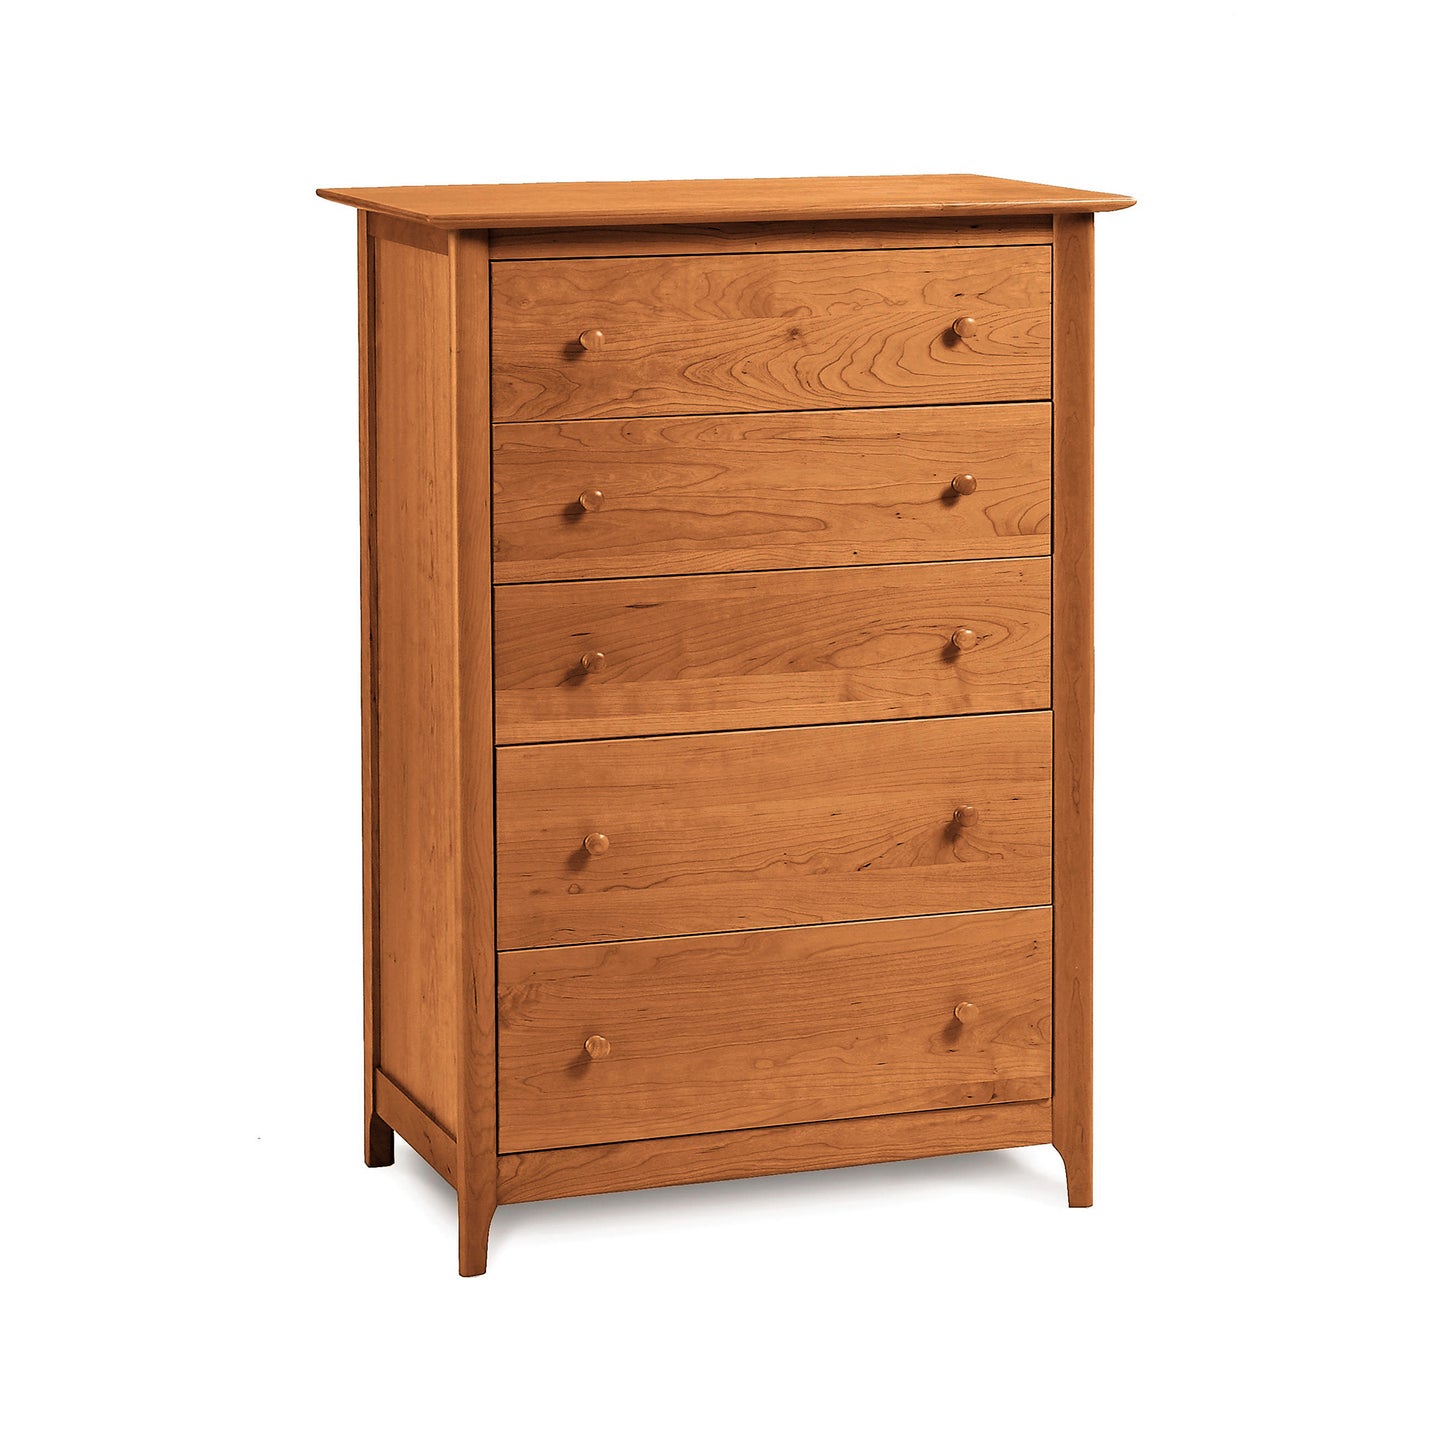 A handmade Copeland Furniture Sarah 5-Drawer Chest with a Shaker design, set against a white background.